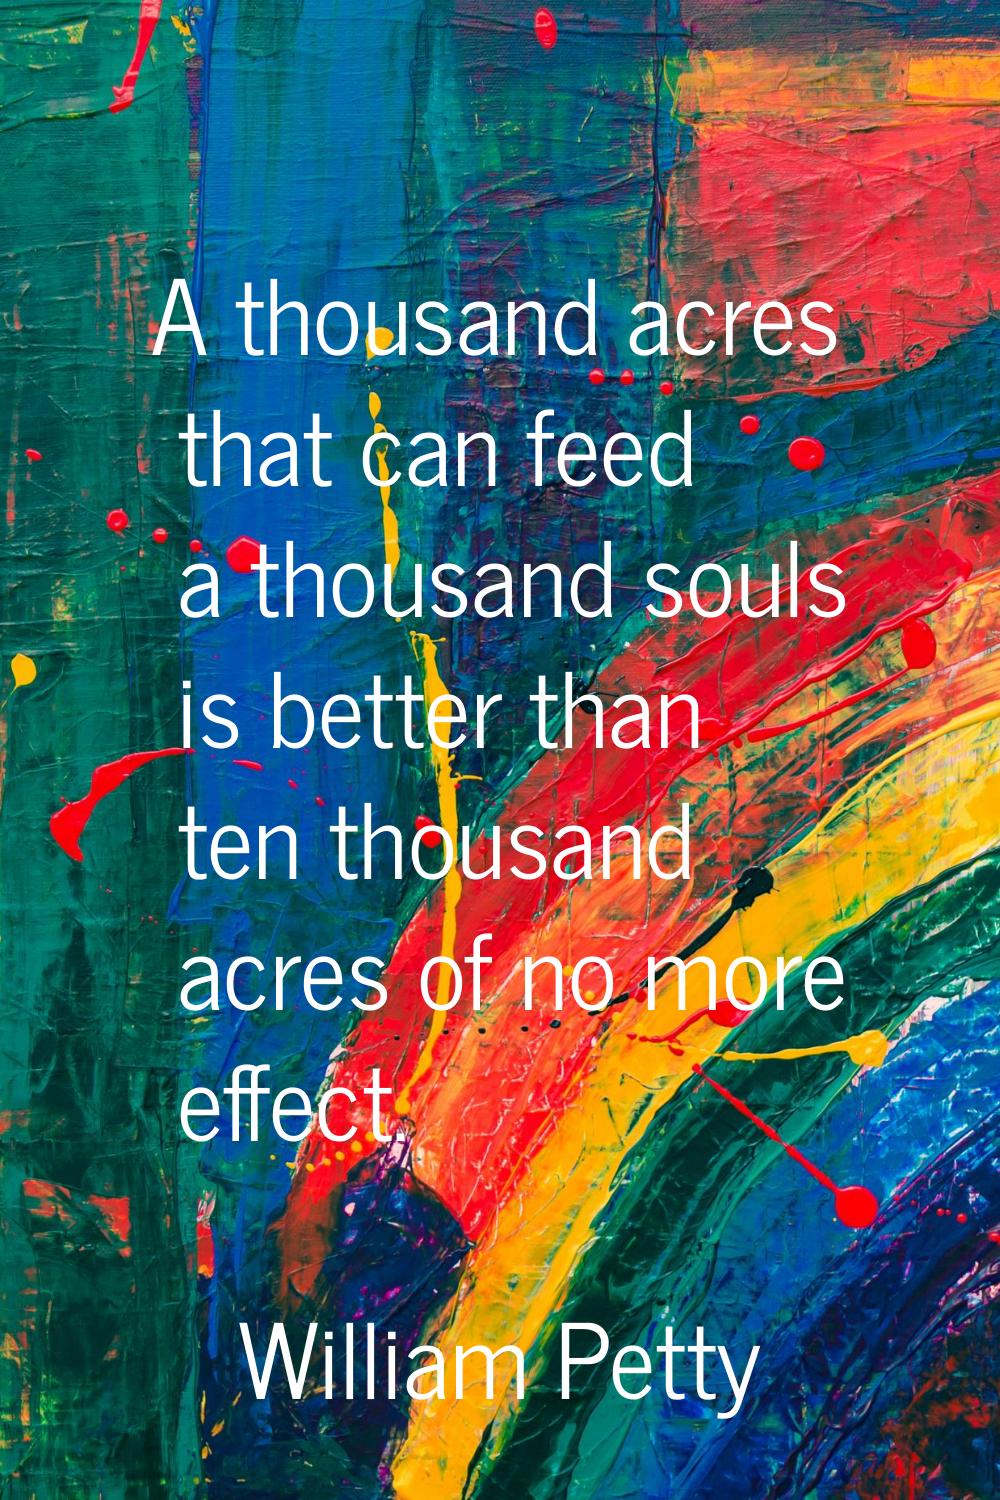 A thousand acres that can feed a thousand souls is better than ten thousand acres of no more effect